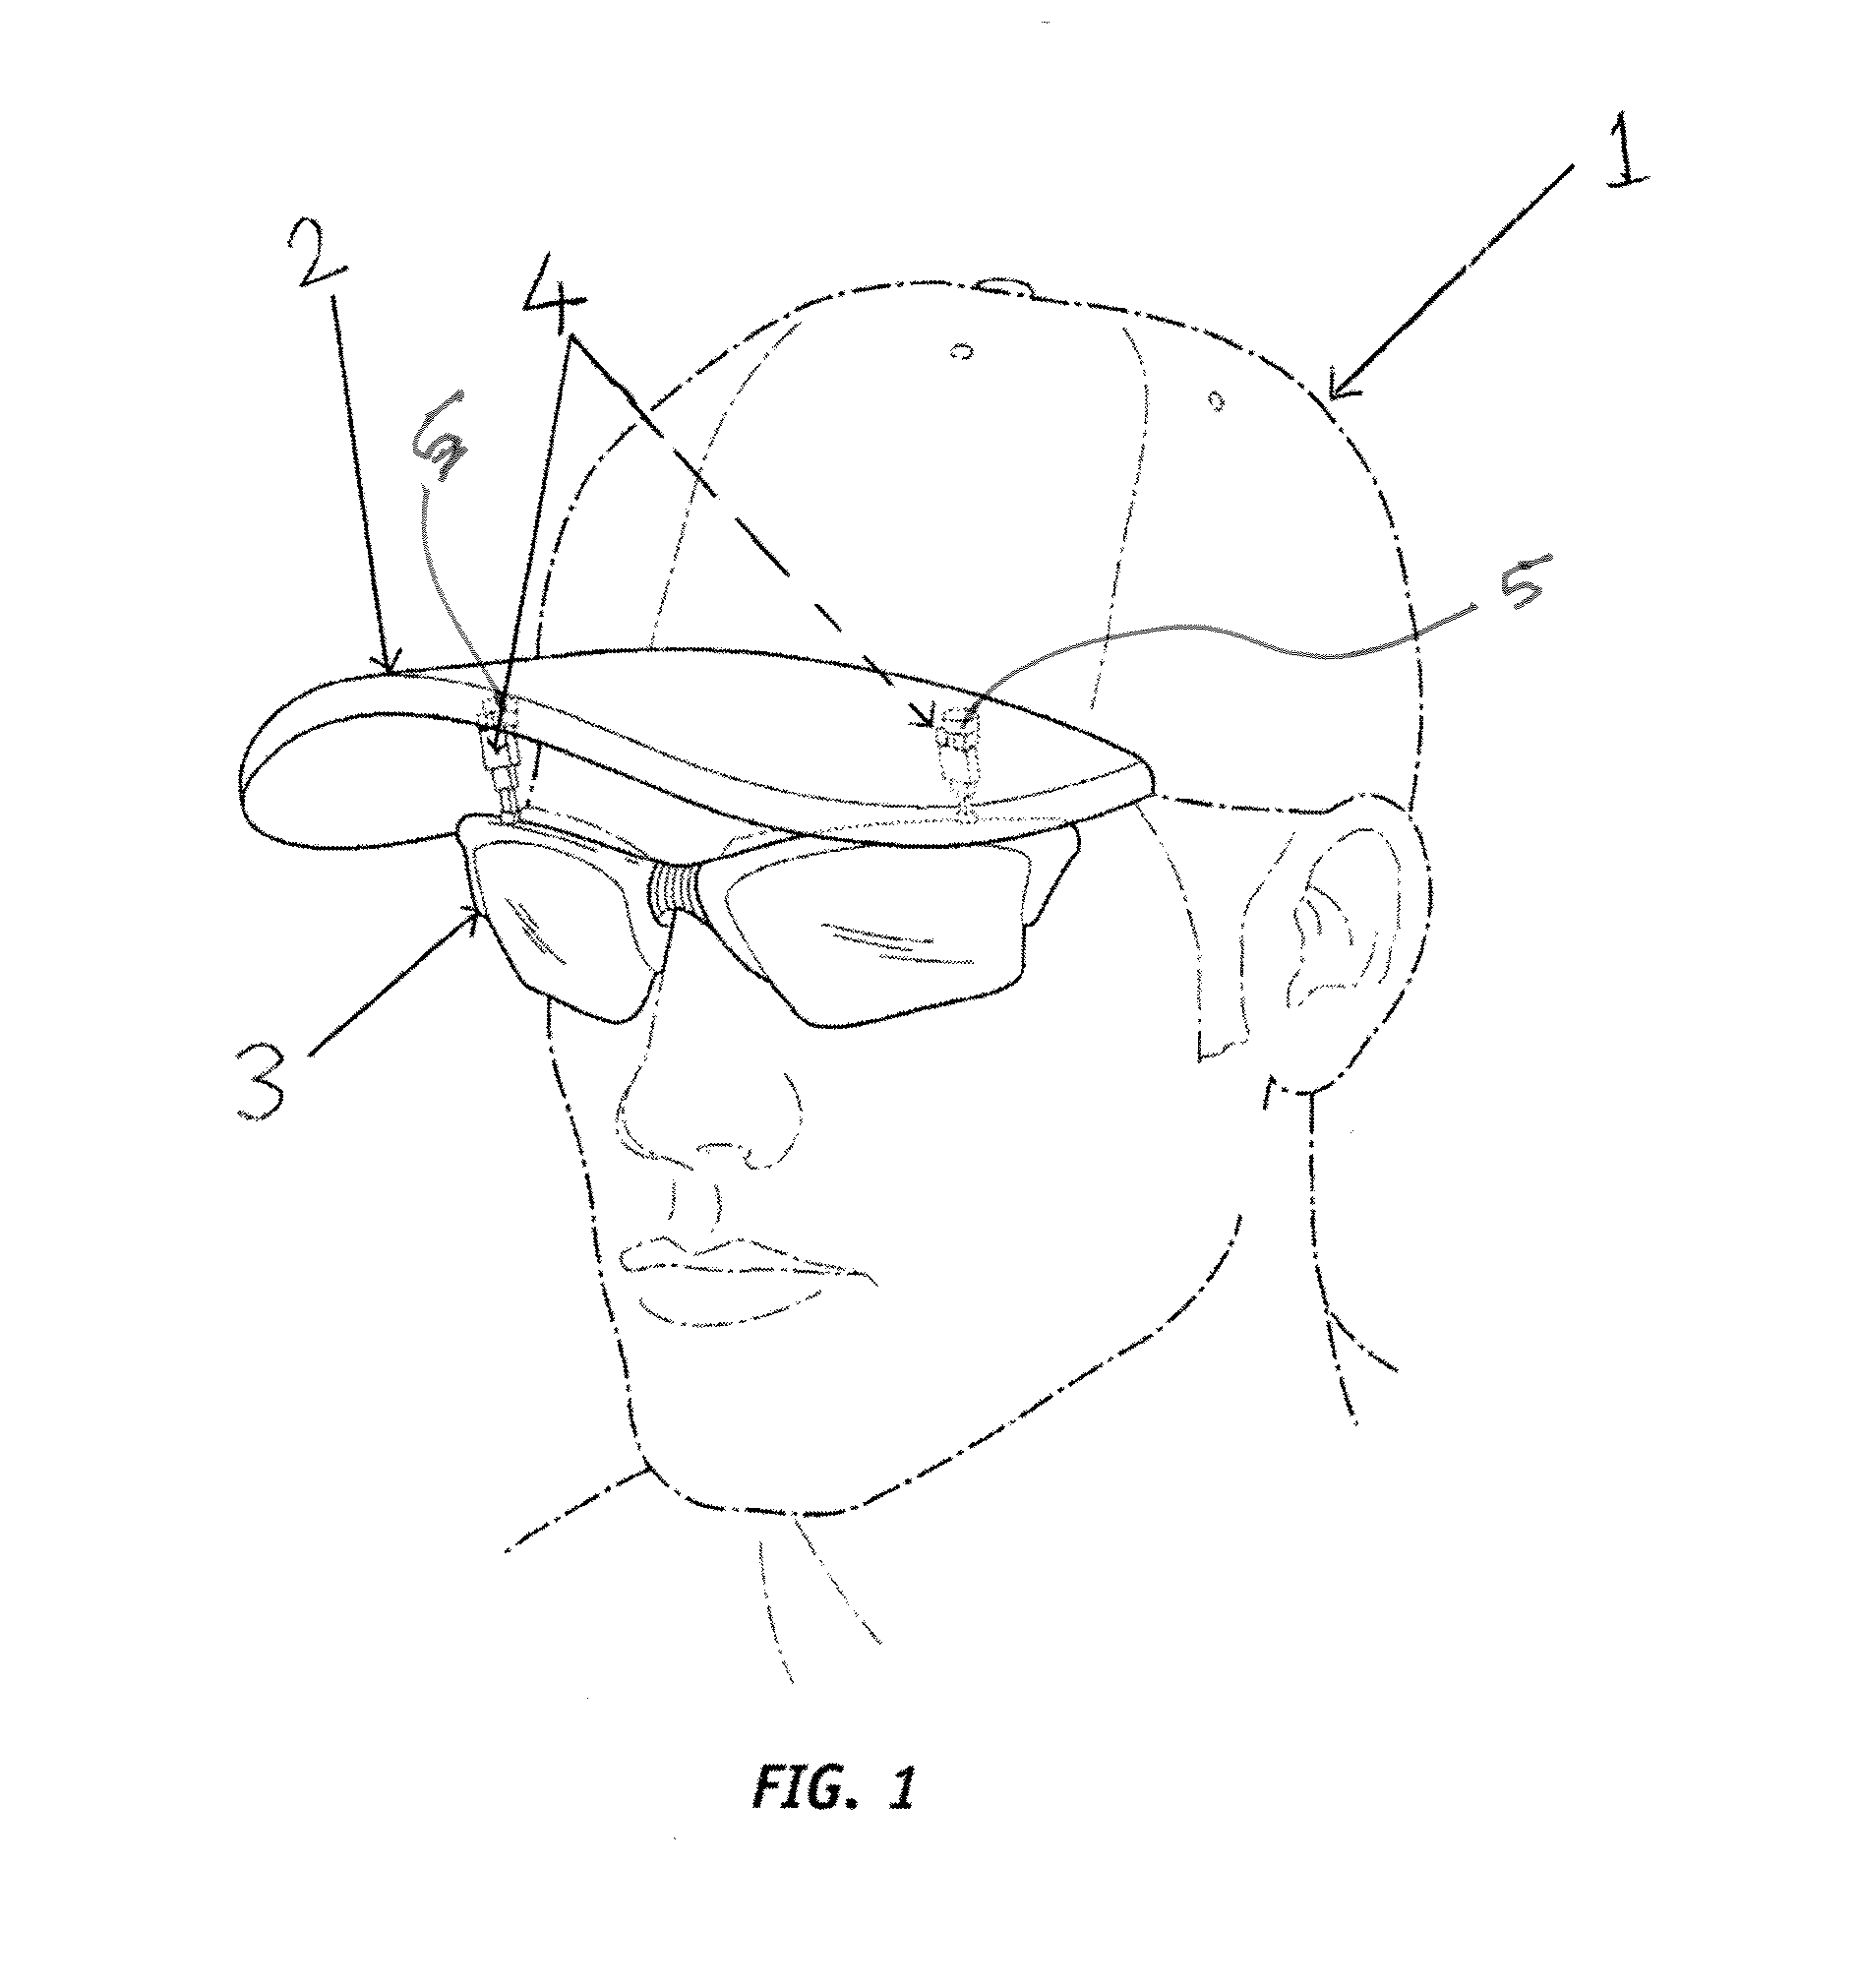 Lenses and visor devices, systems, and methods